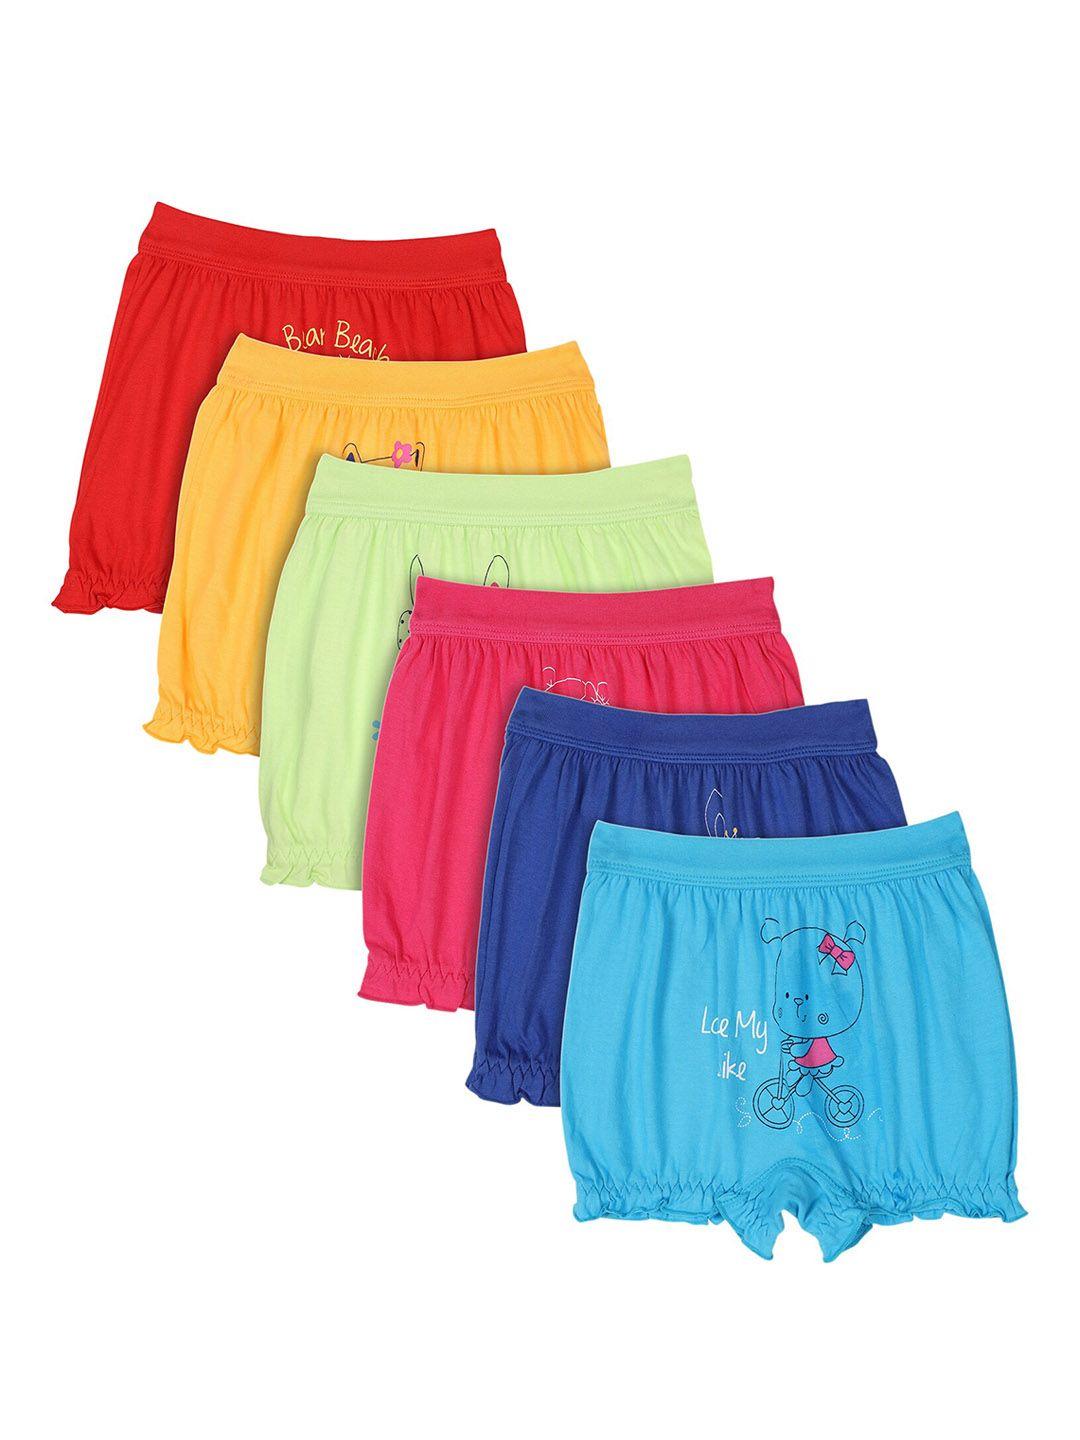 bodycare-unisex-kids-pack-of-6-assorted-cotton-basic-bloomers